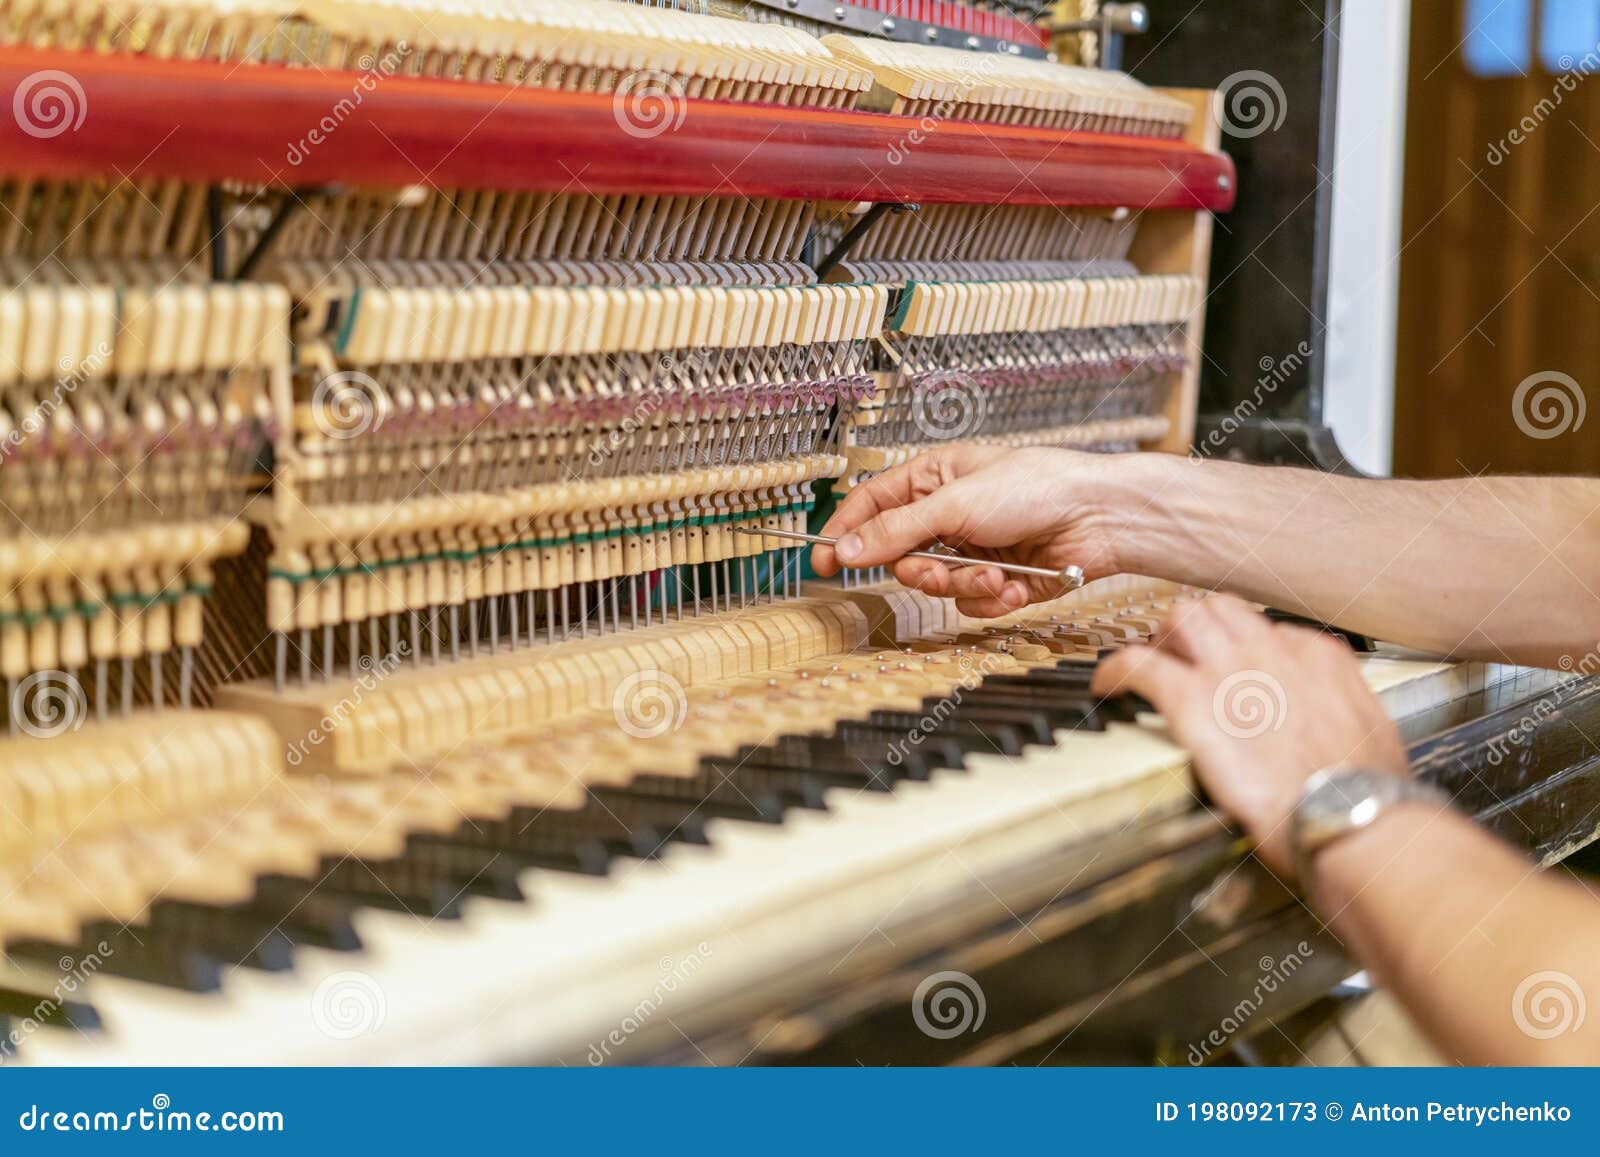 piano tuning process. closeup of hand and tools of tuner working on grand piano. detailed view of upright piano during a tuning.